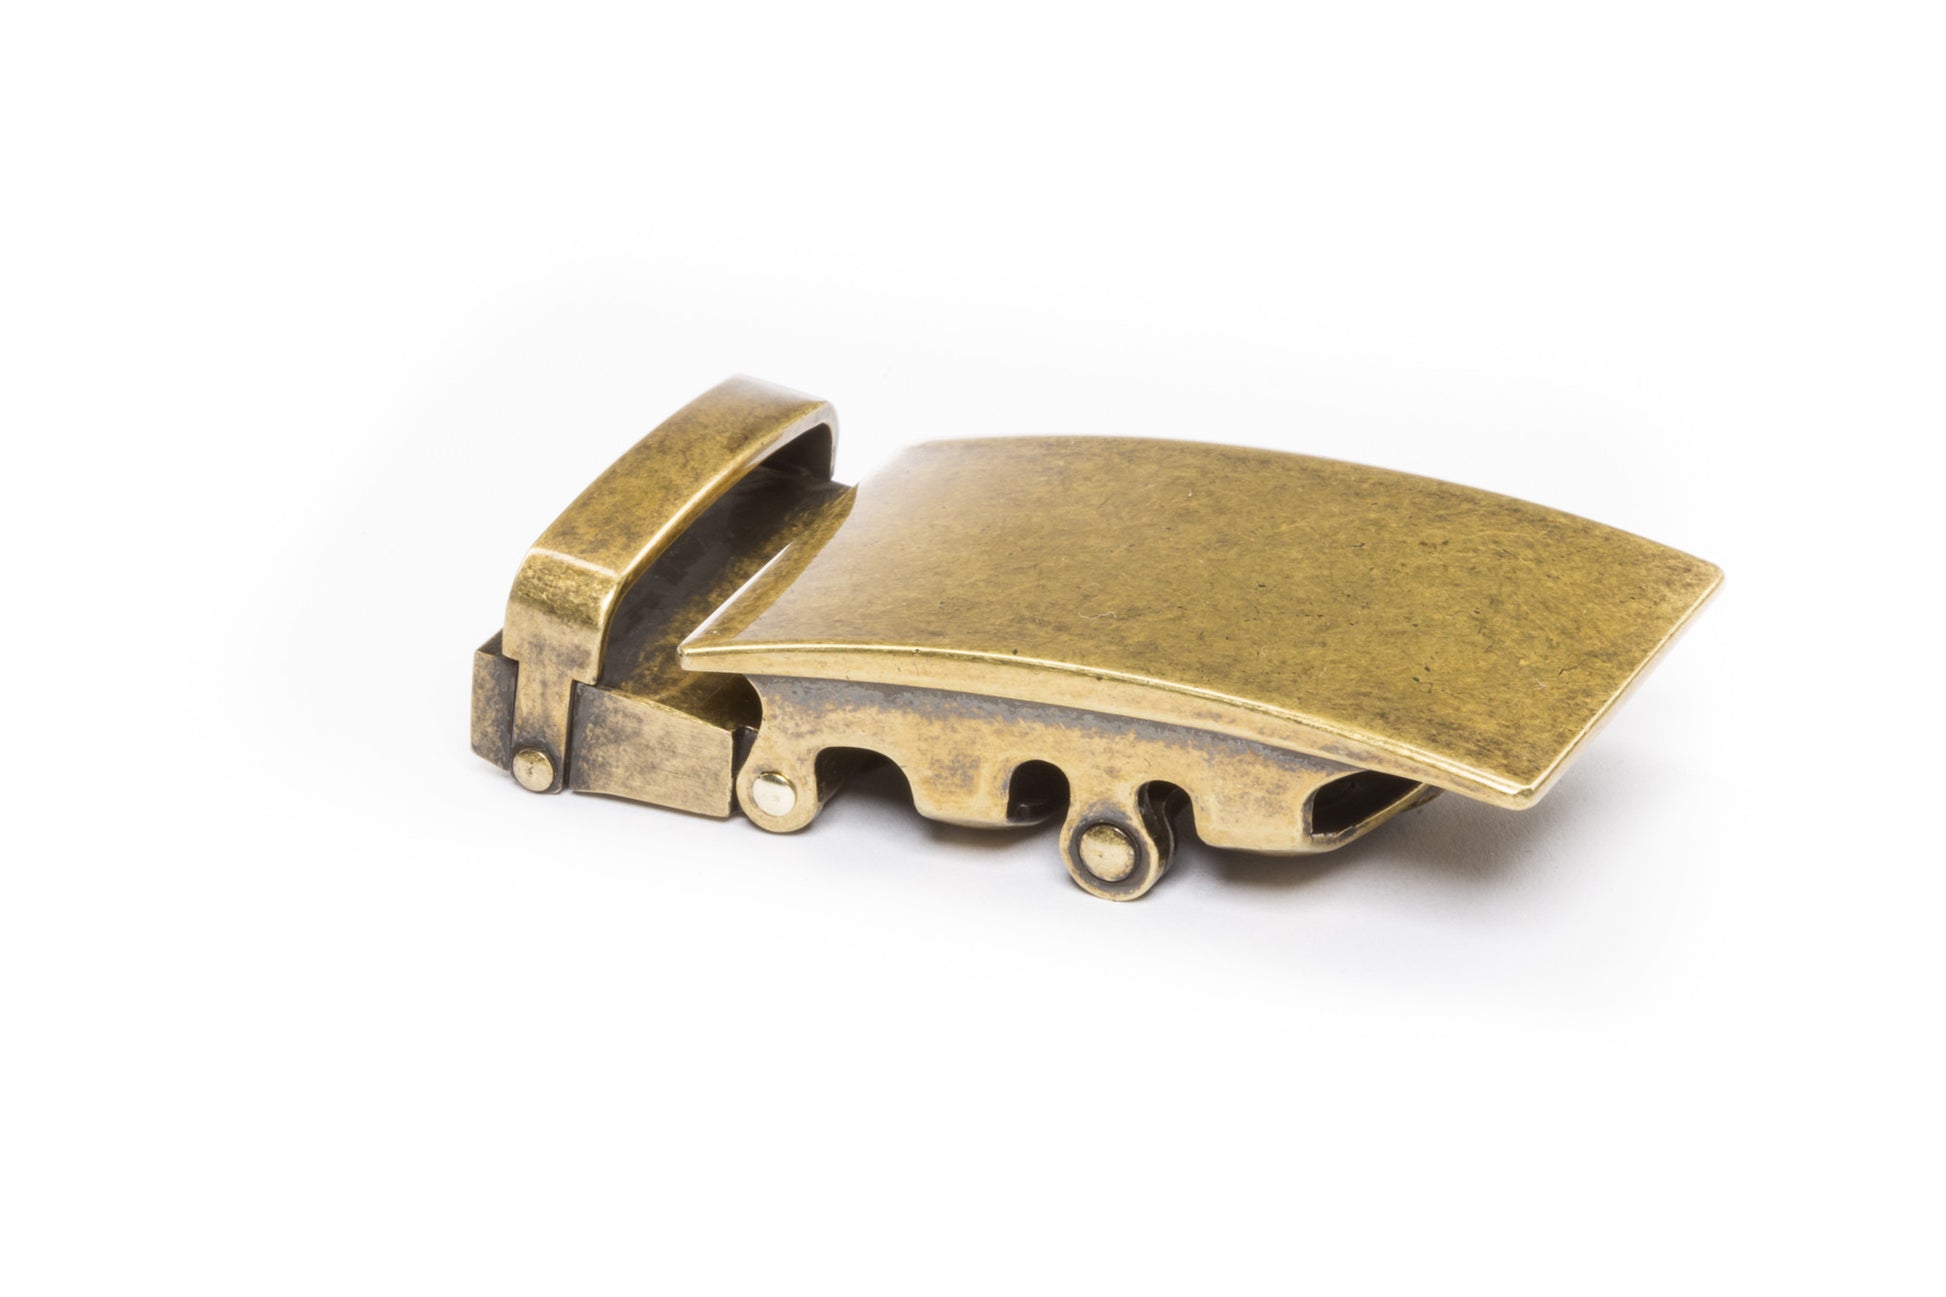 Men's classic ratchet belt buckle in antiqued gold with a width of 1.5 inches, right side view.